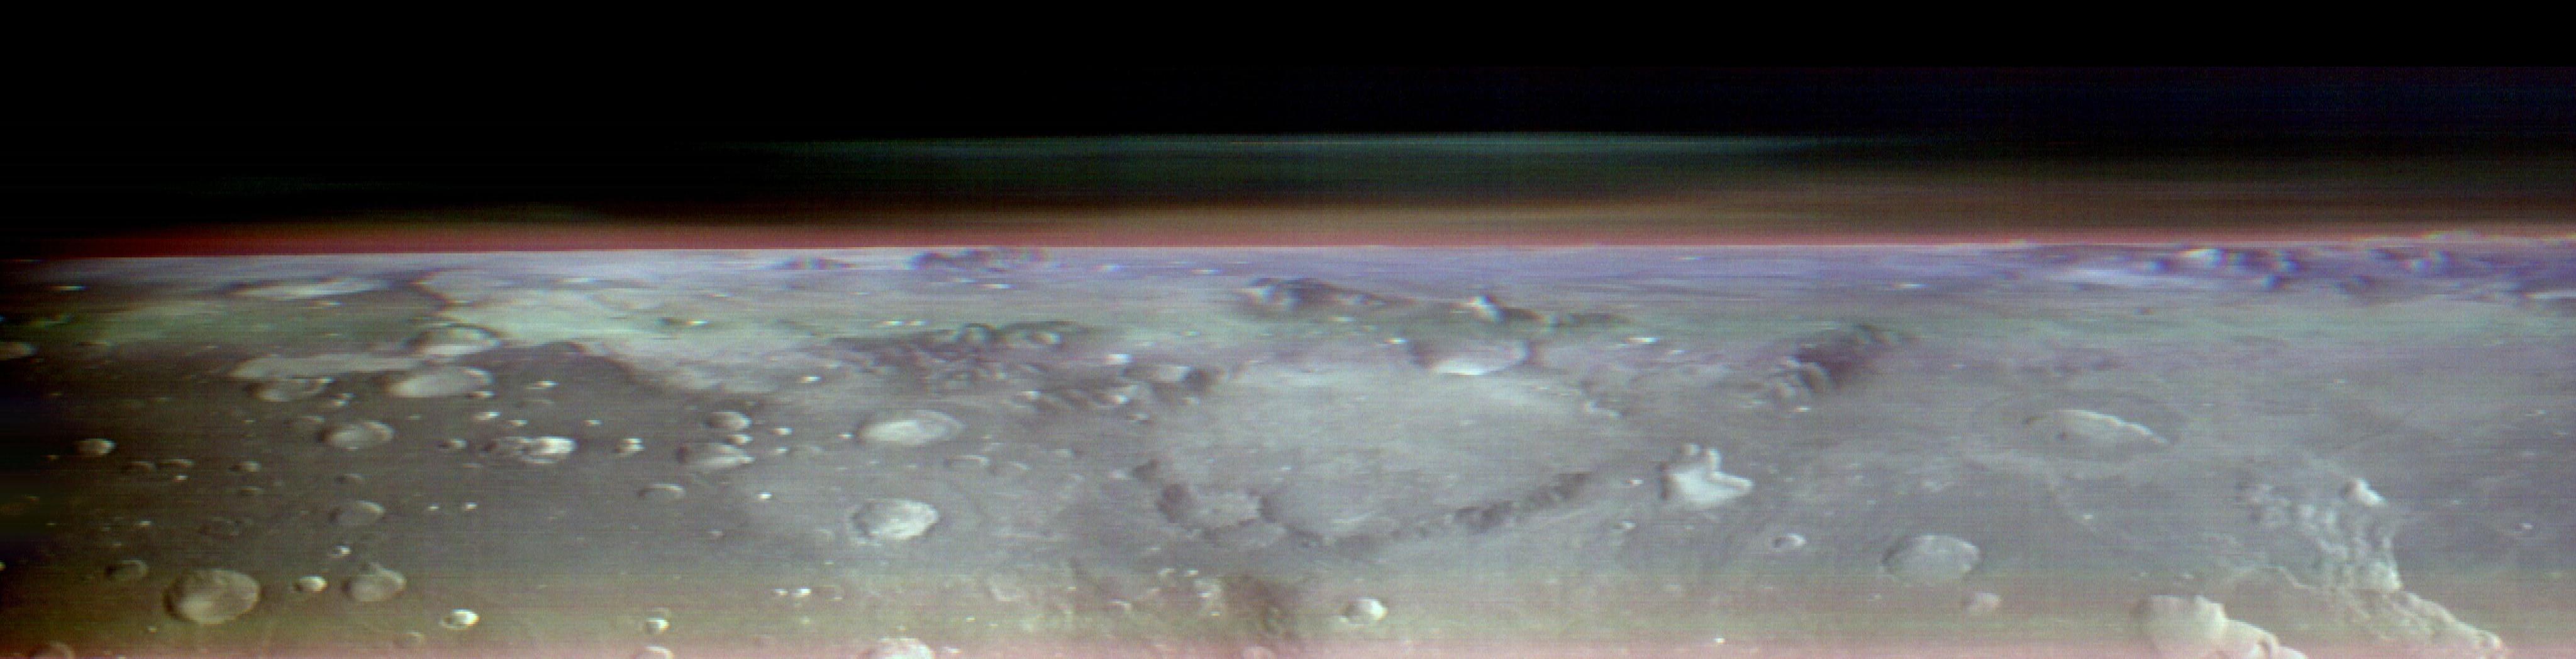 Water-ice (blue) n' dust (red) up in tha atmosphere of Mars above tha cratered Martian surface as viewed from orbit by tha THEMIS camera (false-color composite image).